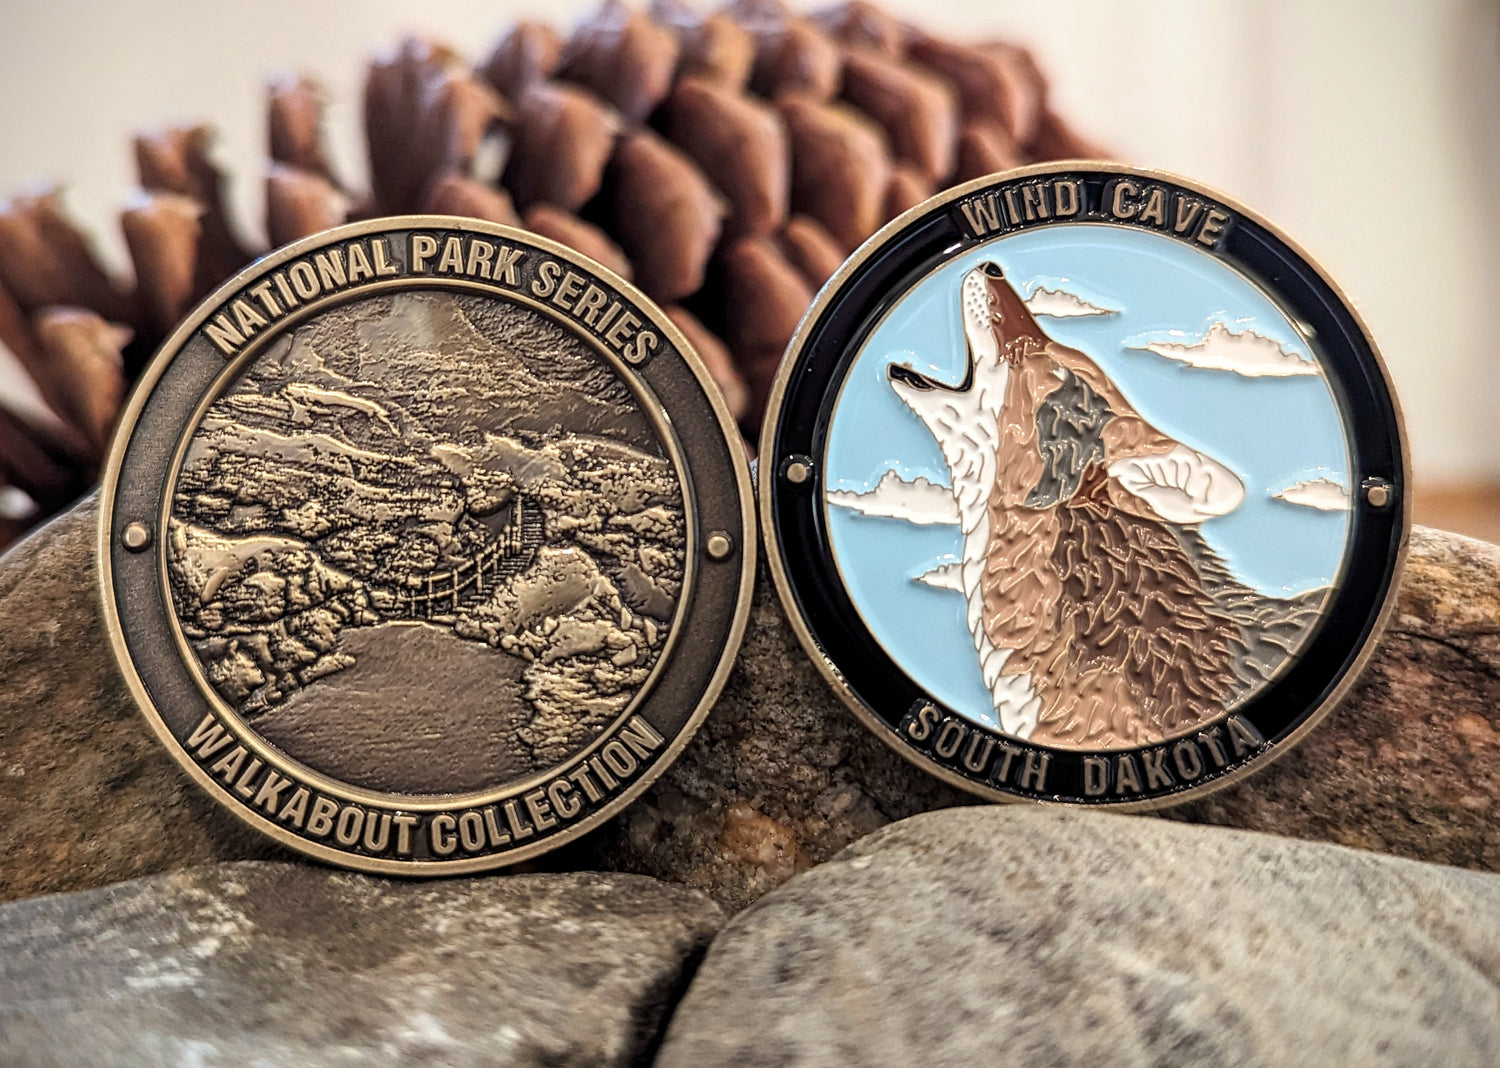 WIND CAVE NATIONAL PARK CHALLENGE COIN